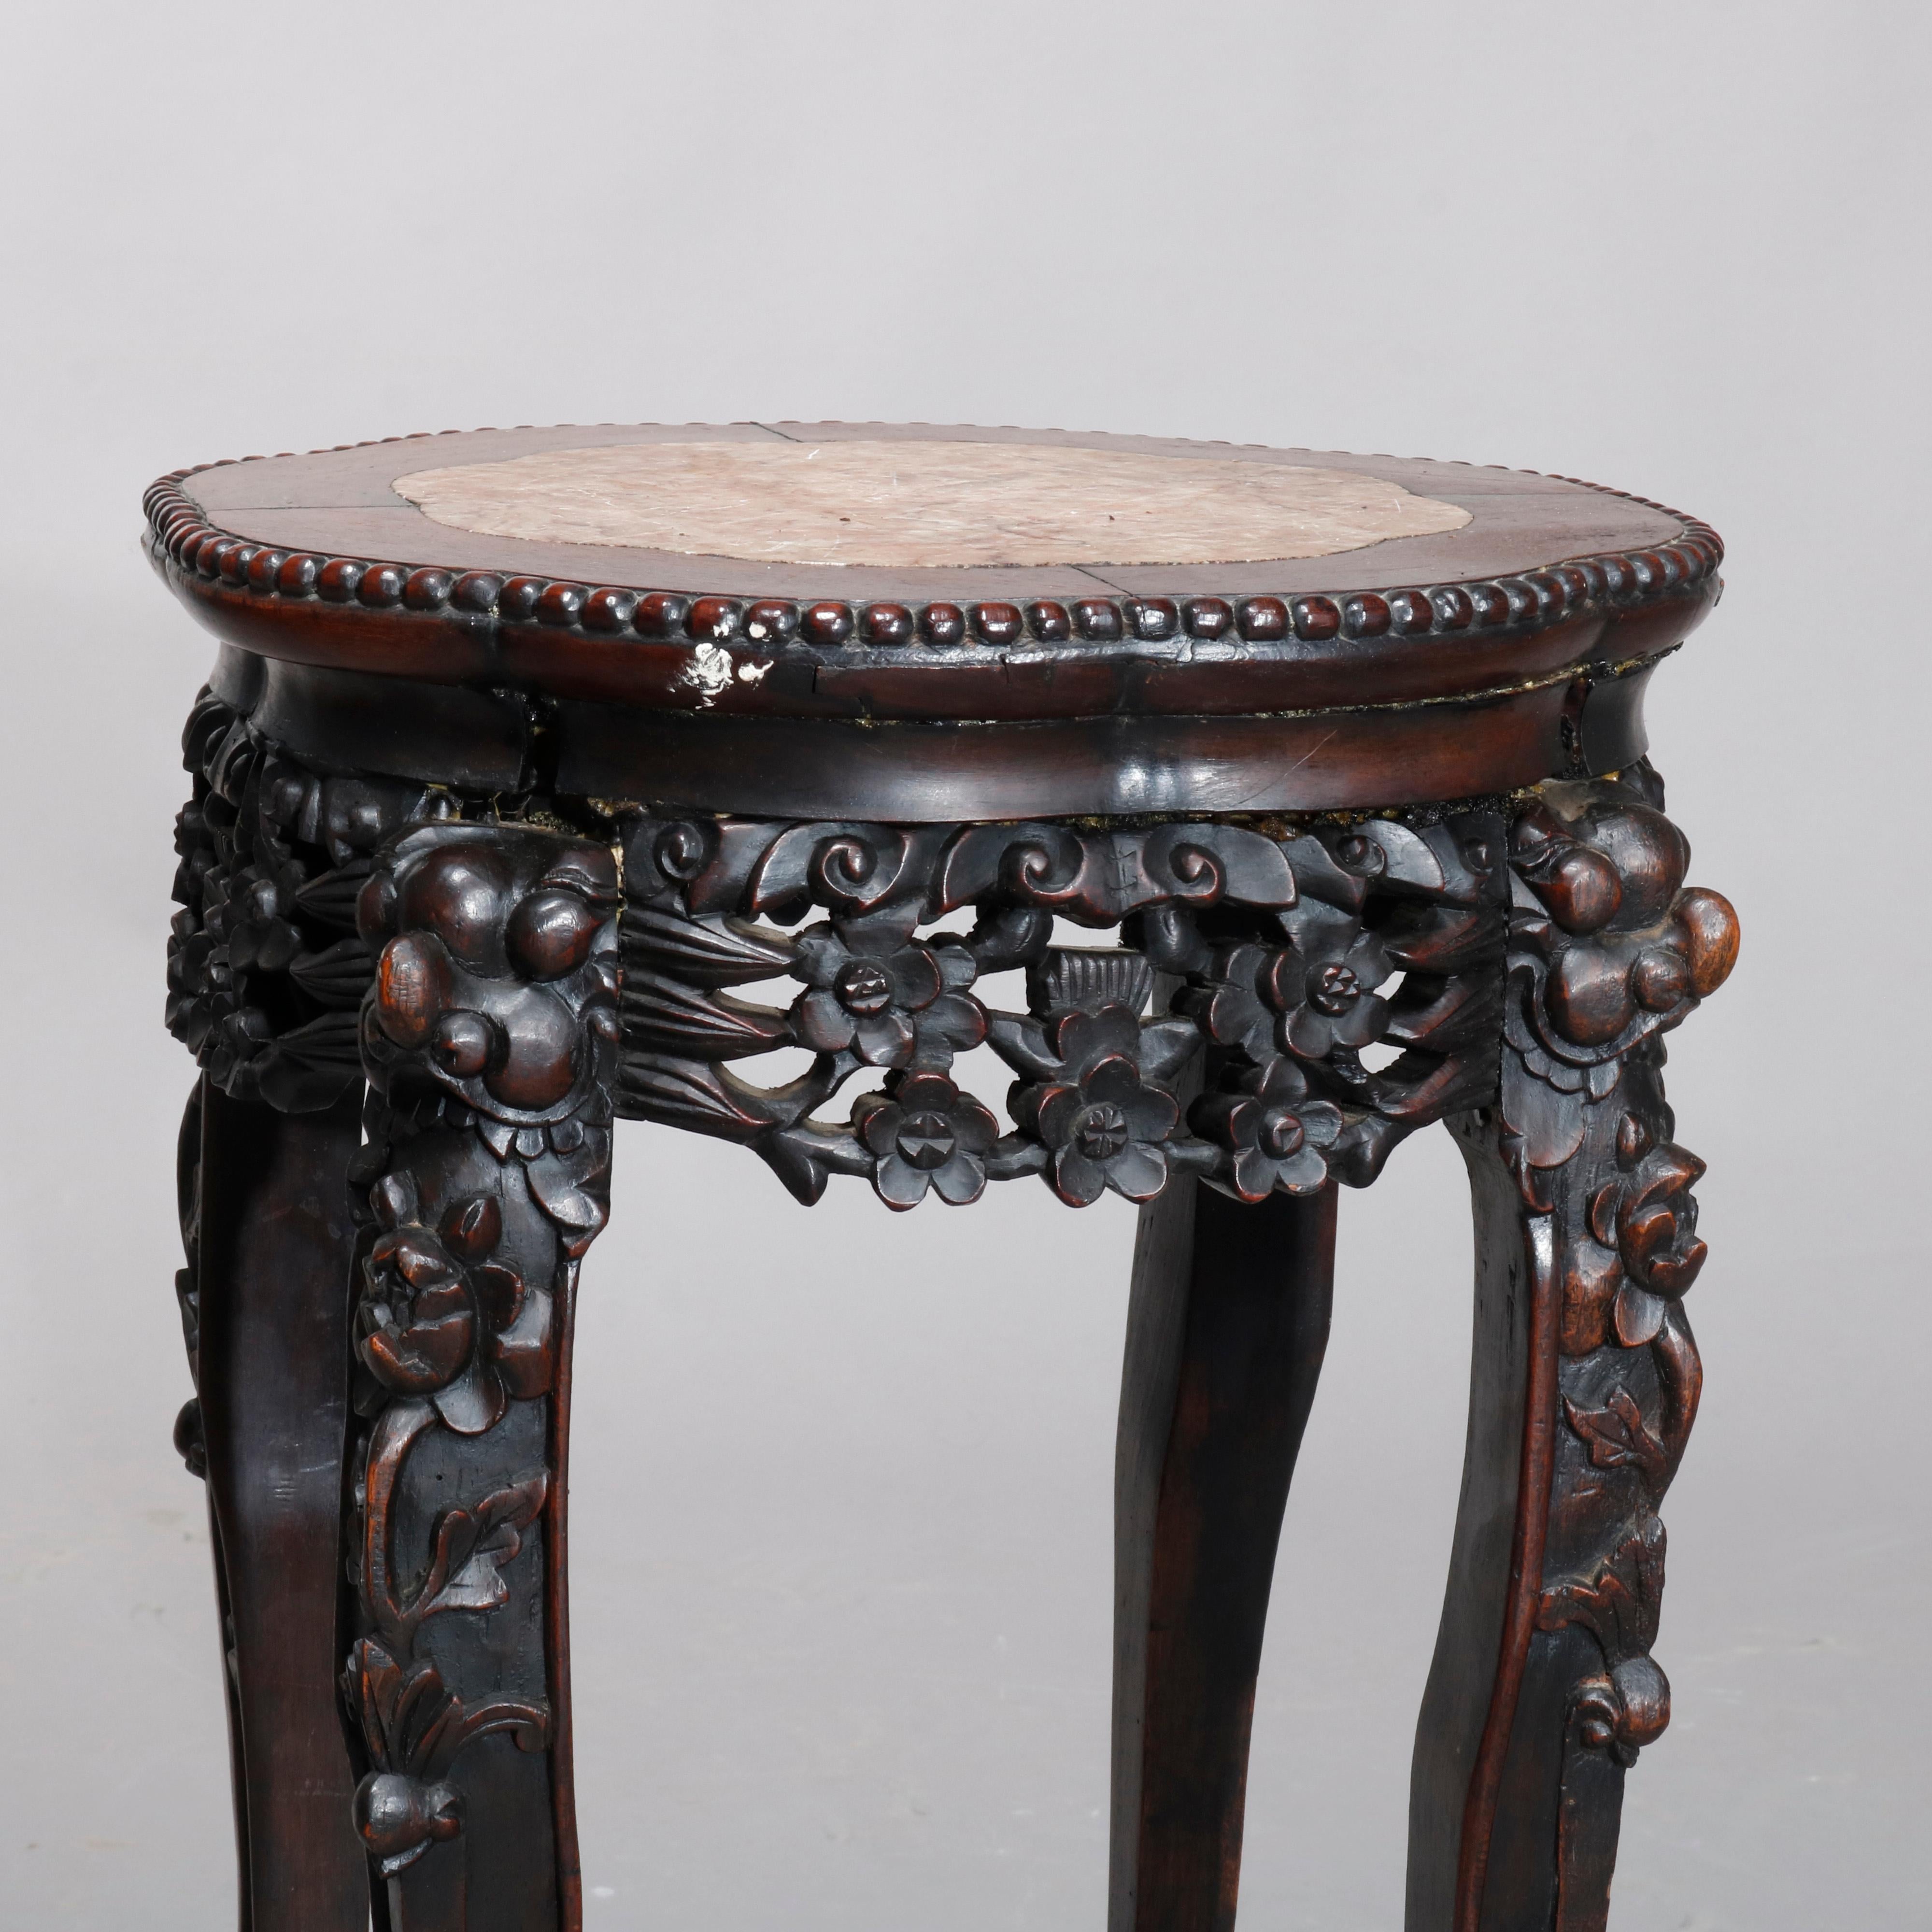 An antique Chinese plant stand offers shaped inset marble-top over carved rosewood stand with pierced floral form skirt, raised on cabriole legs terminating in paw feet, circa 1900

Measures: 27.25